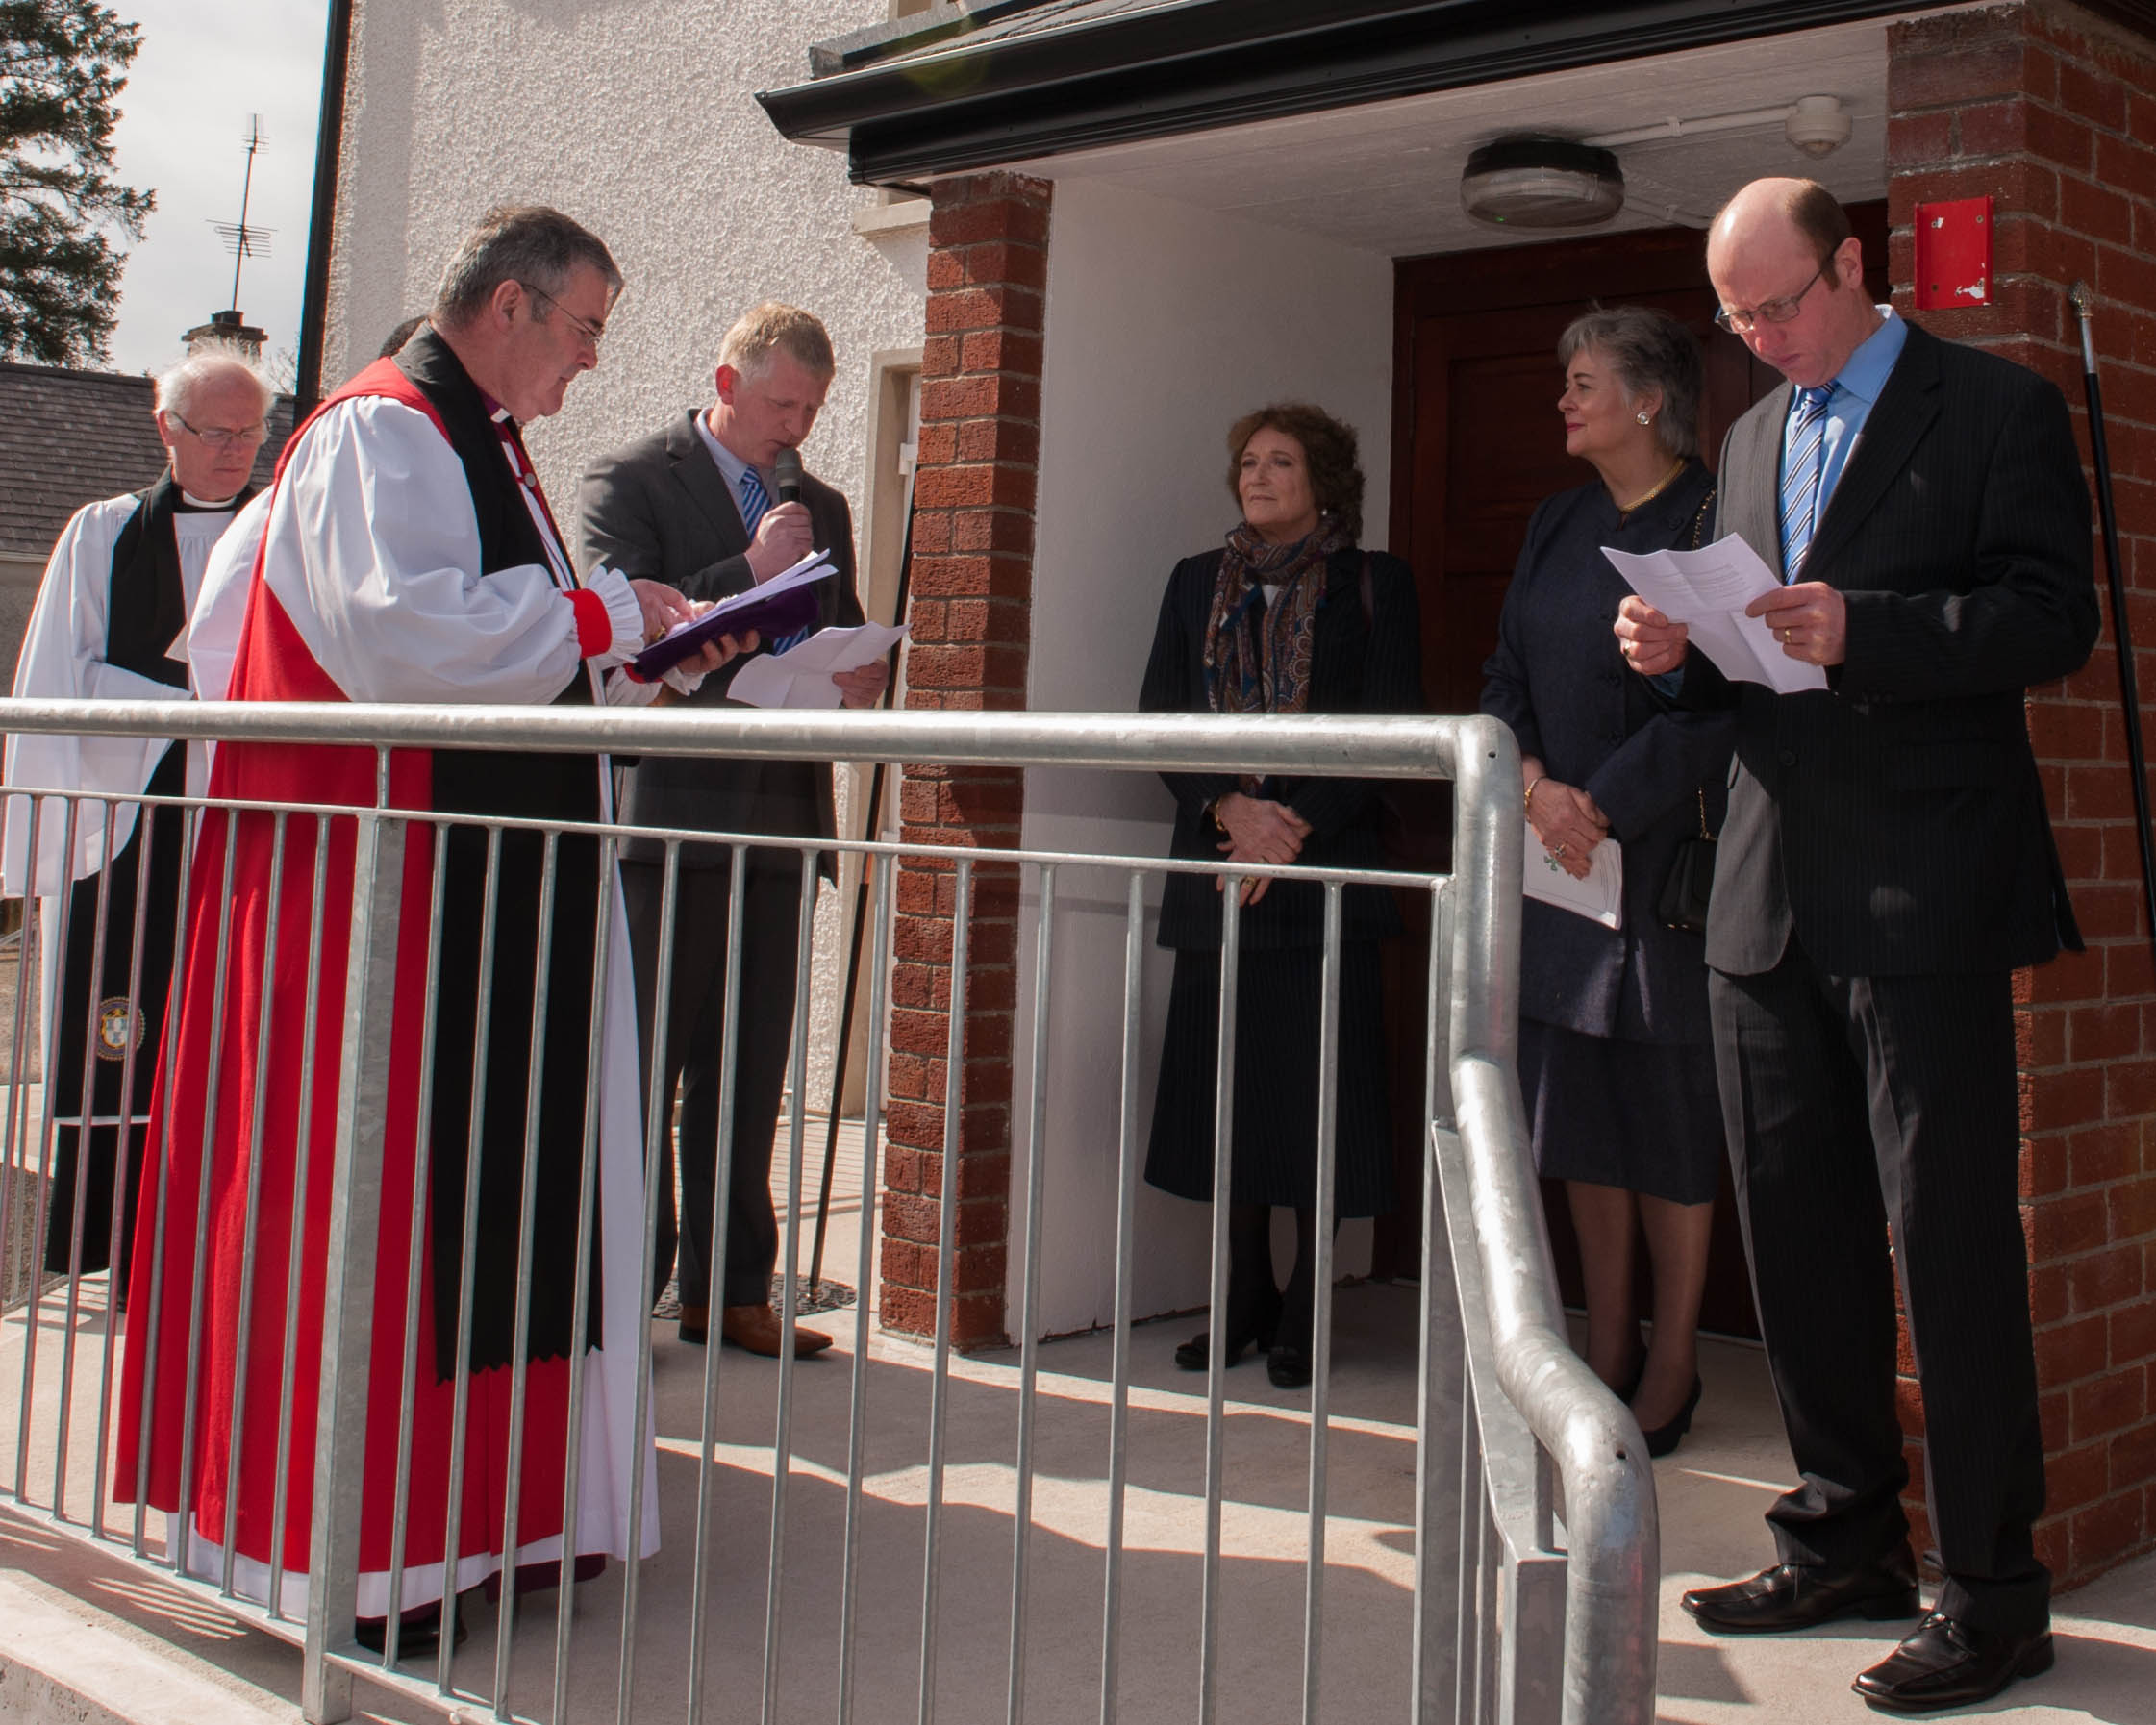 At the opening and dedication of 'The Grosvenor Wing' of the Reade Hall, are the Bishop of Clogher, the Right Revd John McDowell, Chancellor David Skuce, David Ferguson, churchwarden, Leonora, Countess of Lichfield, Lady Jane Dawnay and Colin Ferguson, churchwarden.